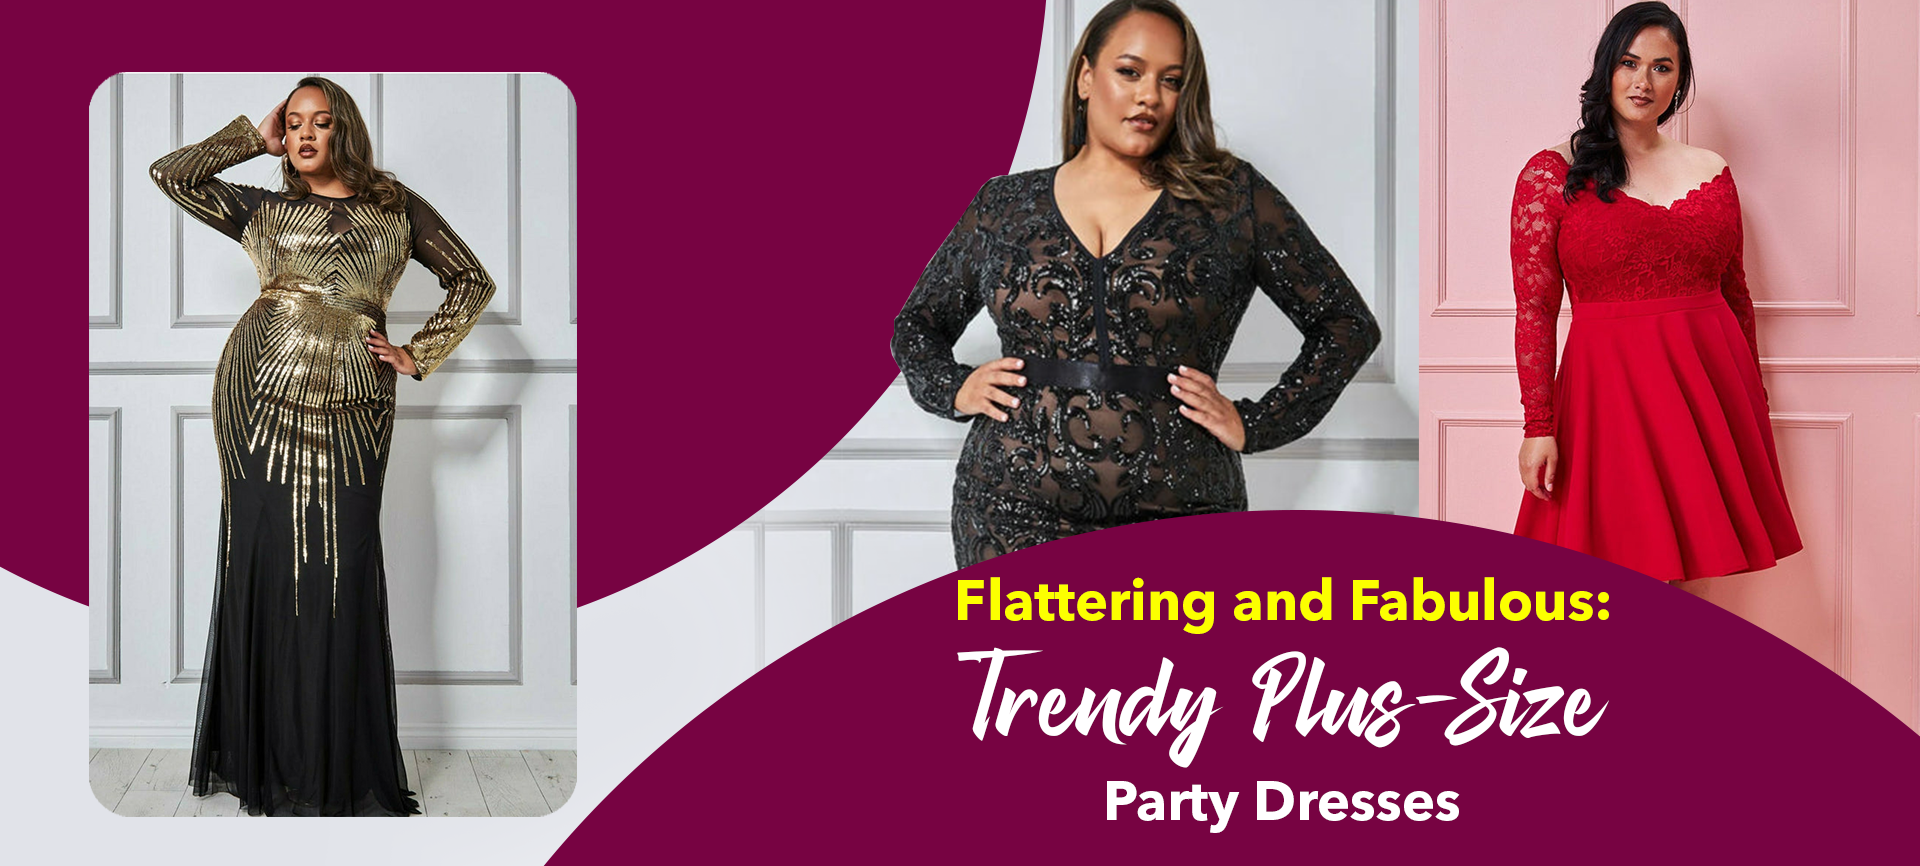 Flattering and Fabulous: Trendy Plus-Size Party Dresses  Flattering and Fabulous: Trendy Plus-Size Party Dresses